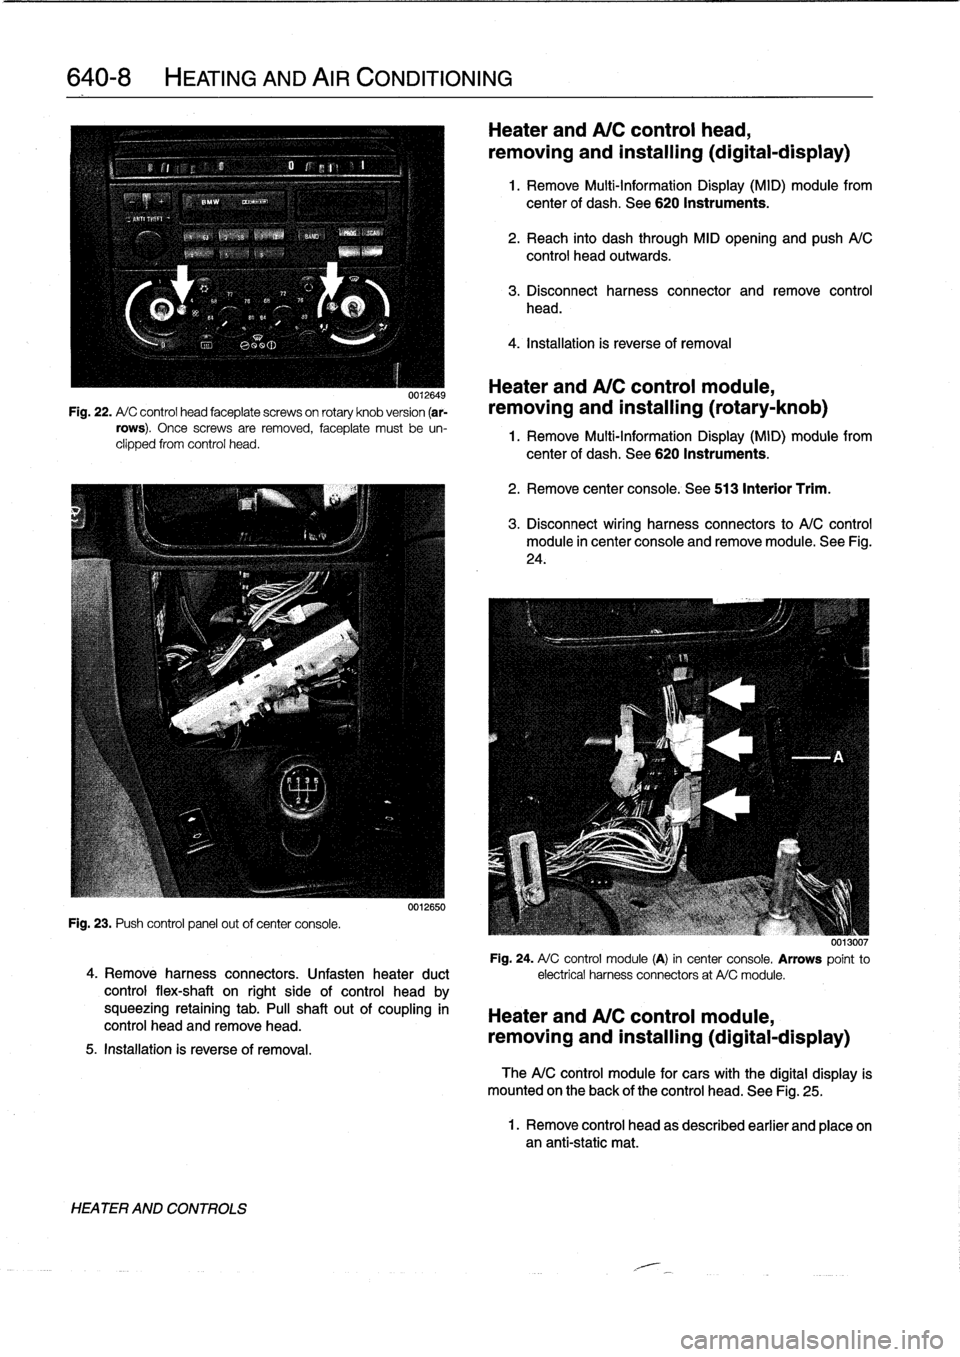 BMW 318i 1998 E36 Service Manual 
640-8

	

HEATING
AND
AIR
CONDITIONING

0012649

Fig
.
22
.
A/
C
control
head
faceplate
screwson
rotary
knob
version
(ar-
rows)
.
Once
screws
are
removed,
faceplate
must
be
un-
clipped
from
control
h